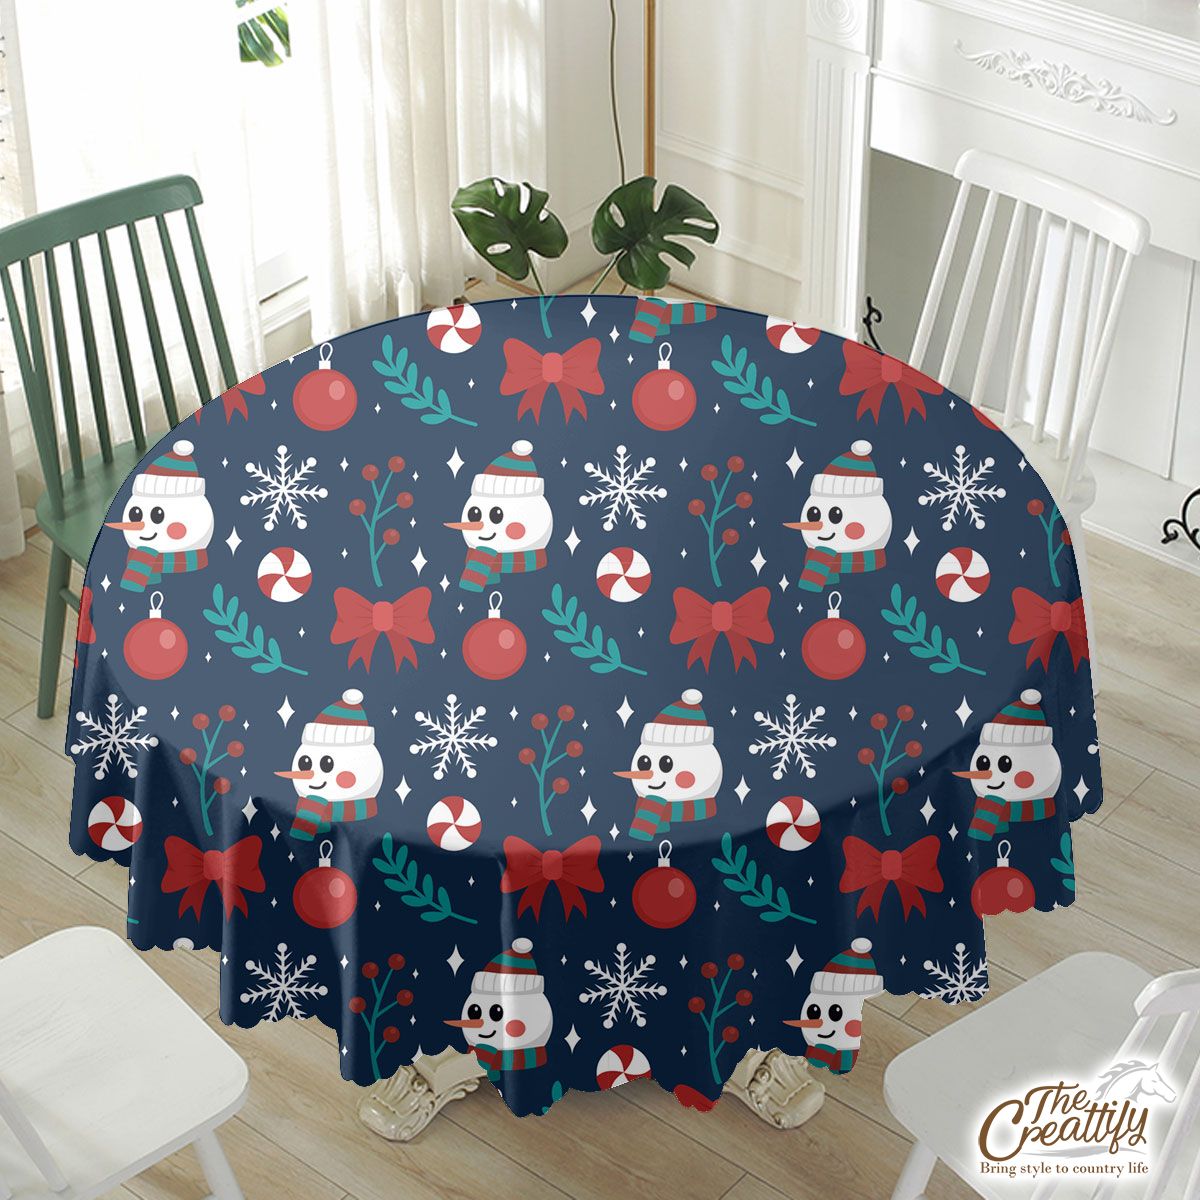 Snowman Face With Baubles And Christmas Bow Waterproof Tablecloth